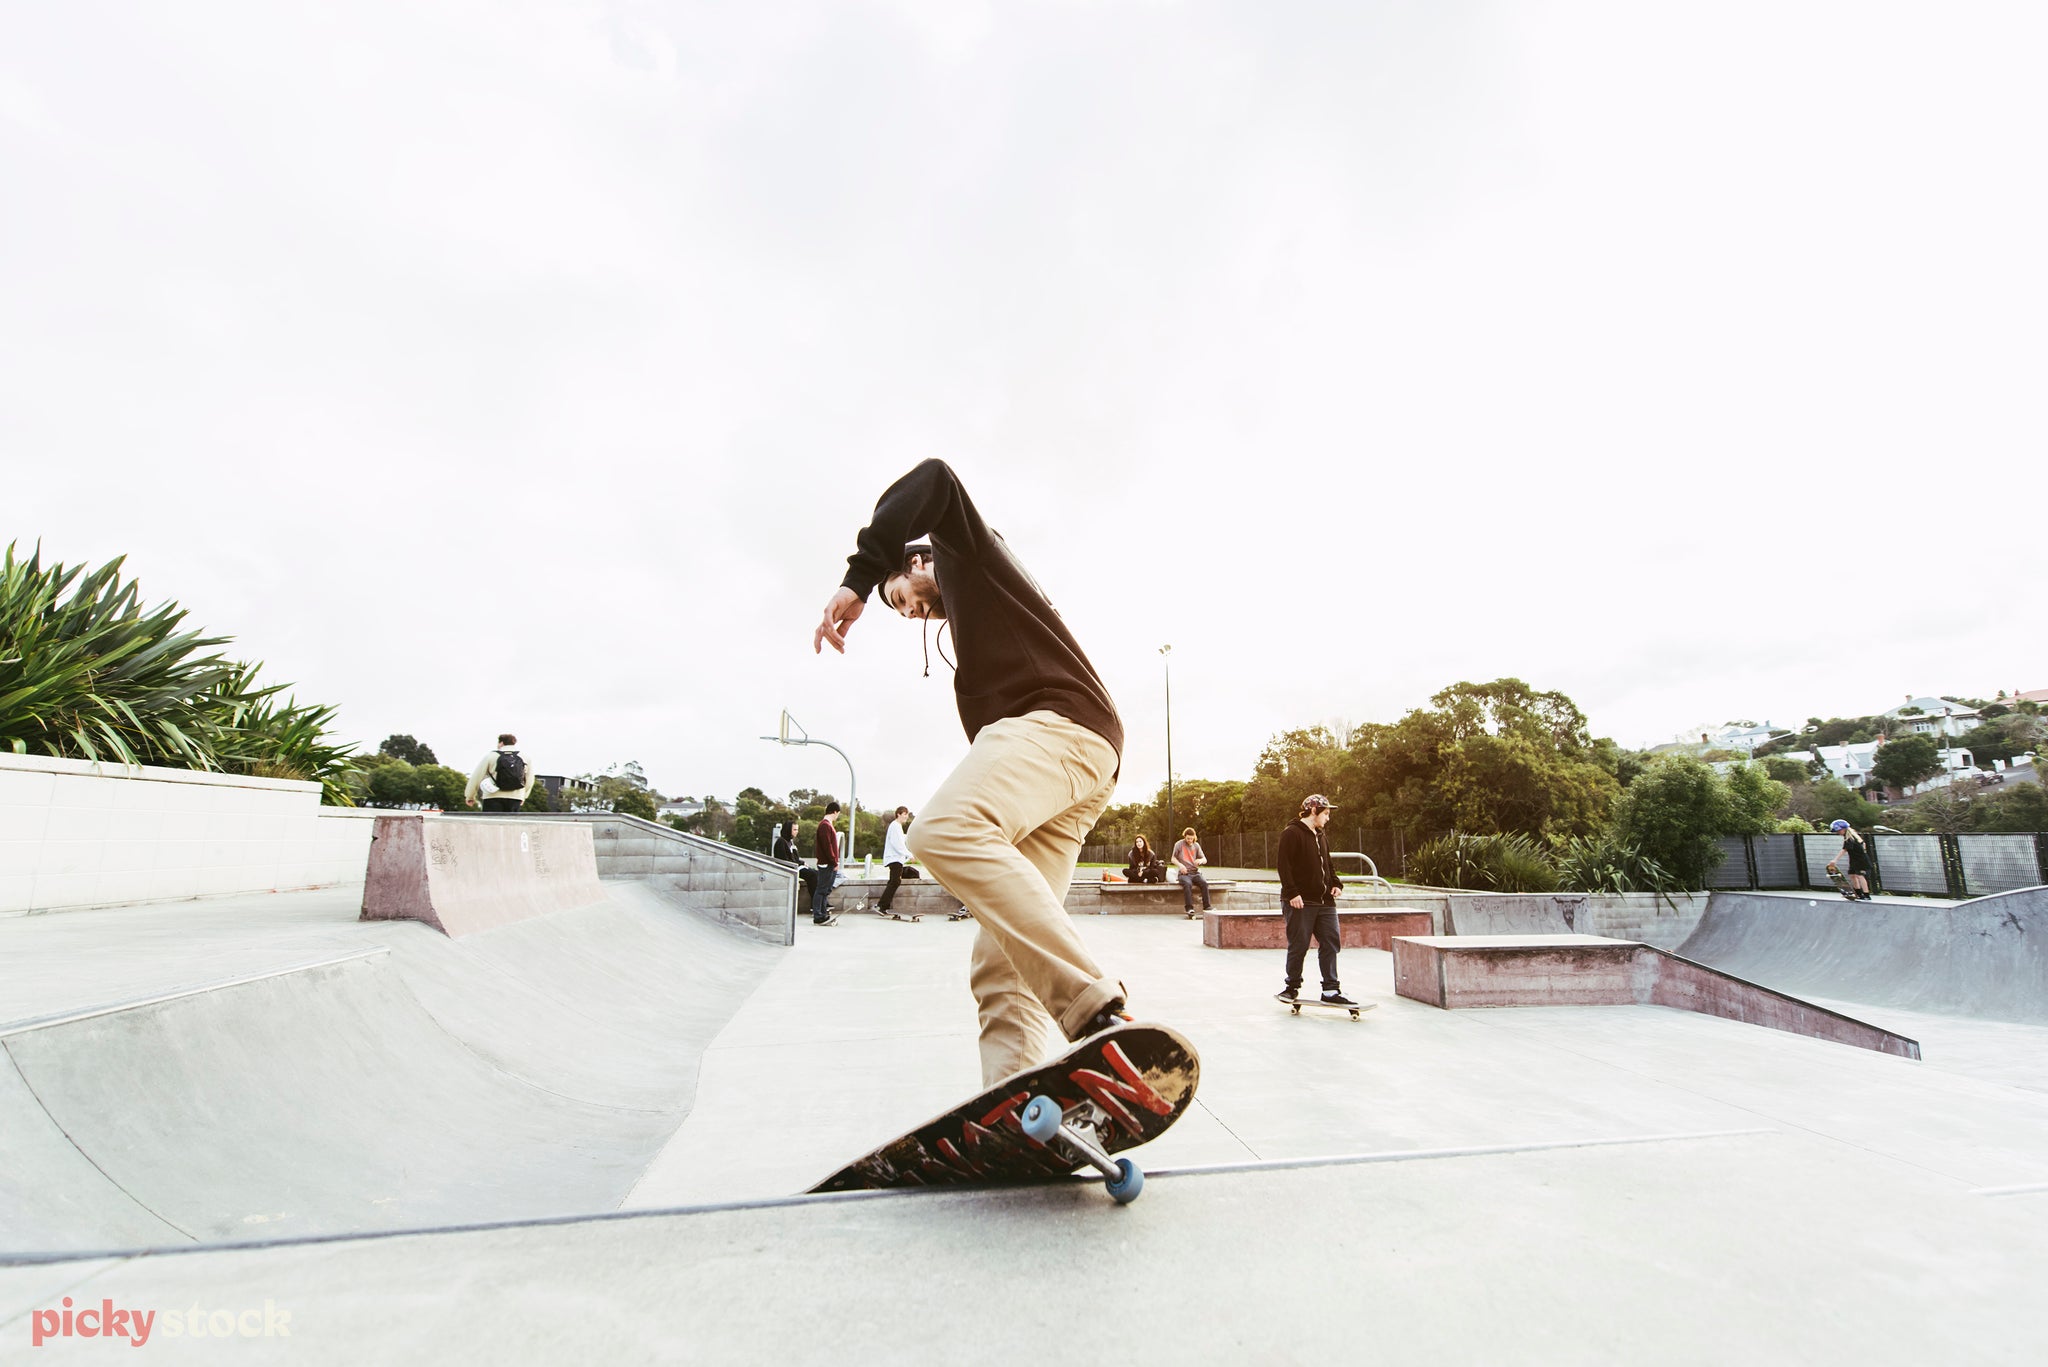 Skateboarder in chinos and a hoodie grinds a concrete ramp at a New Zealand skate park. 